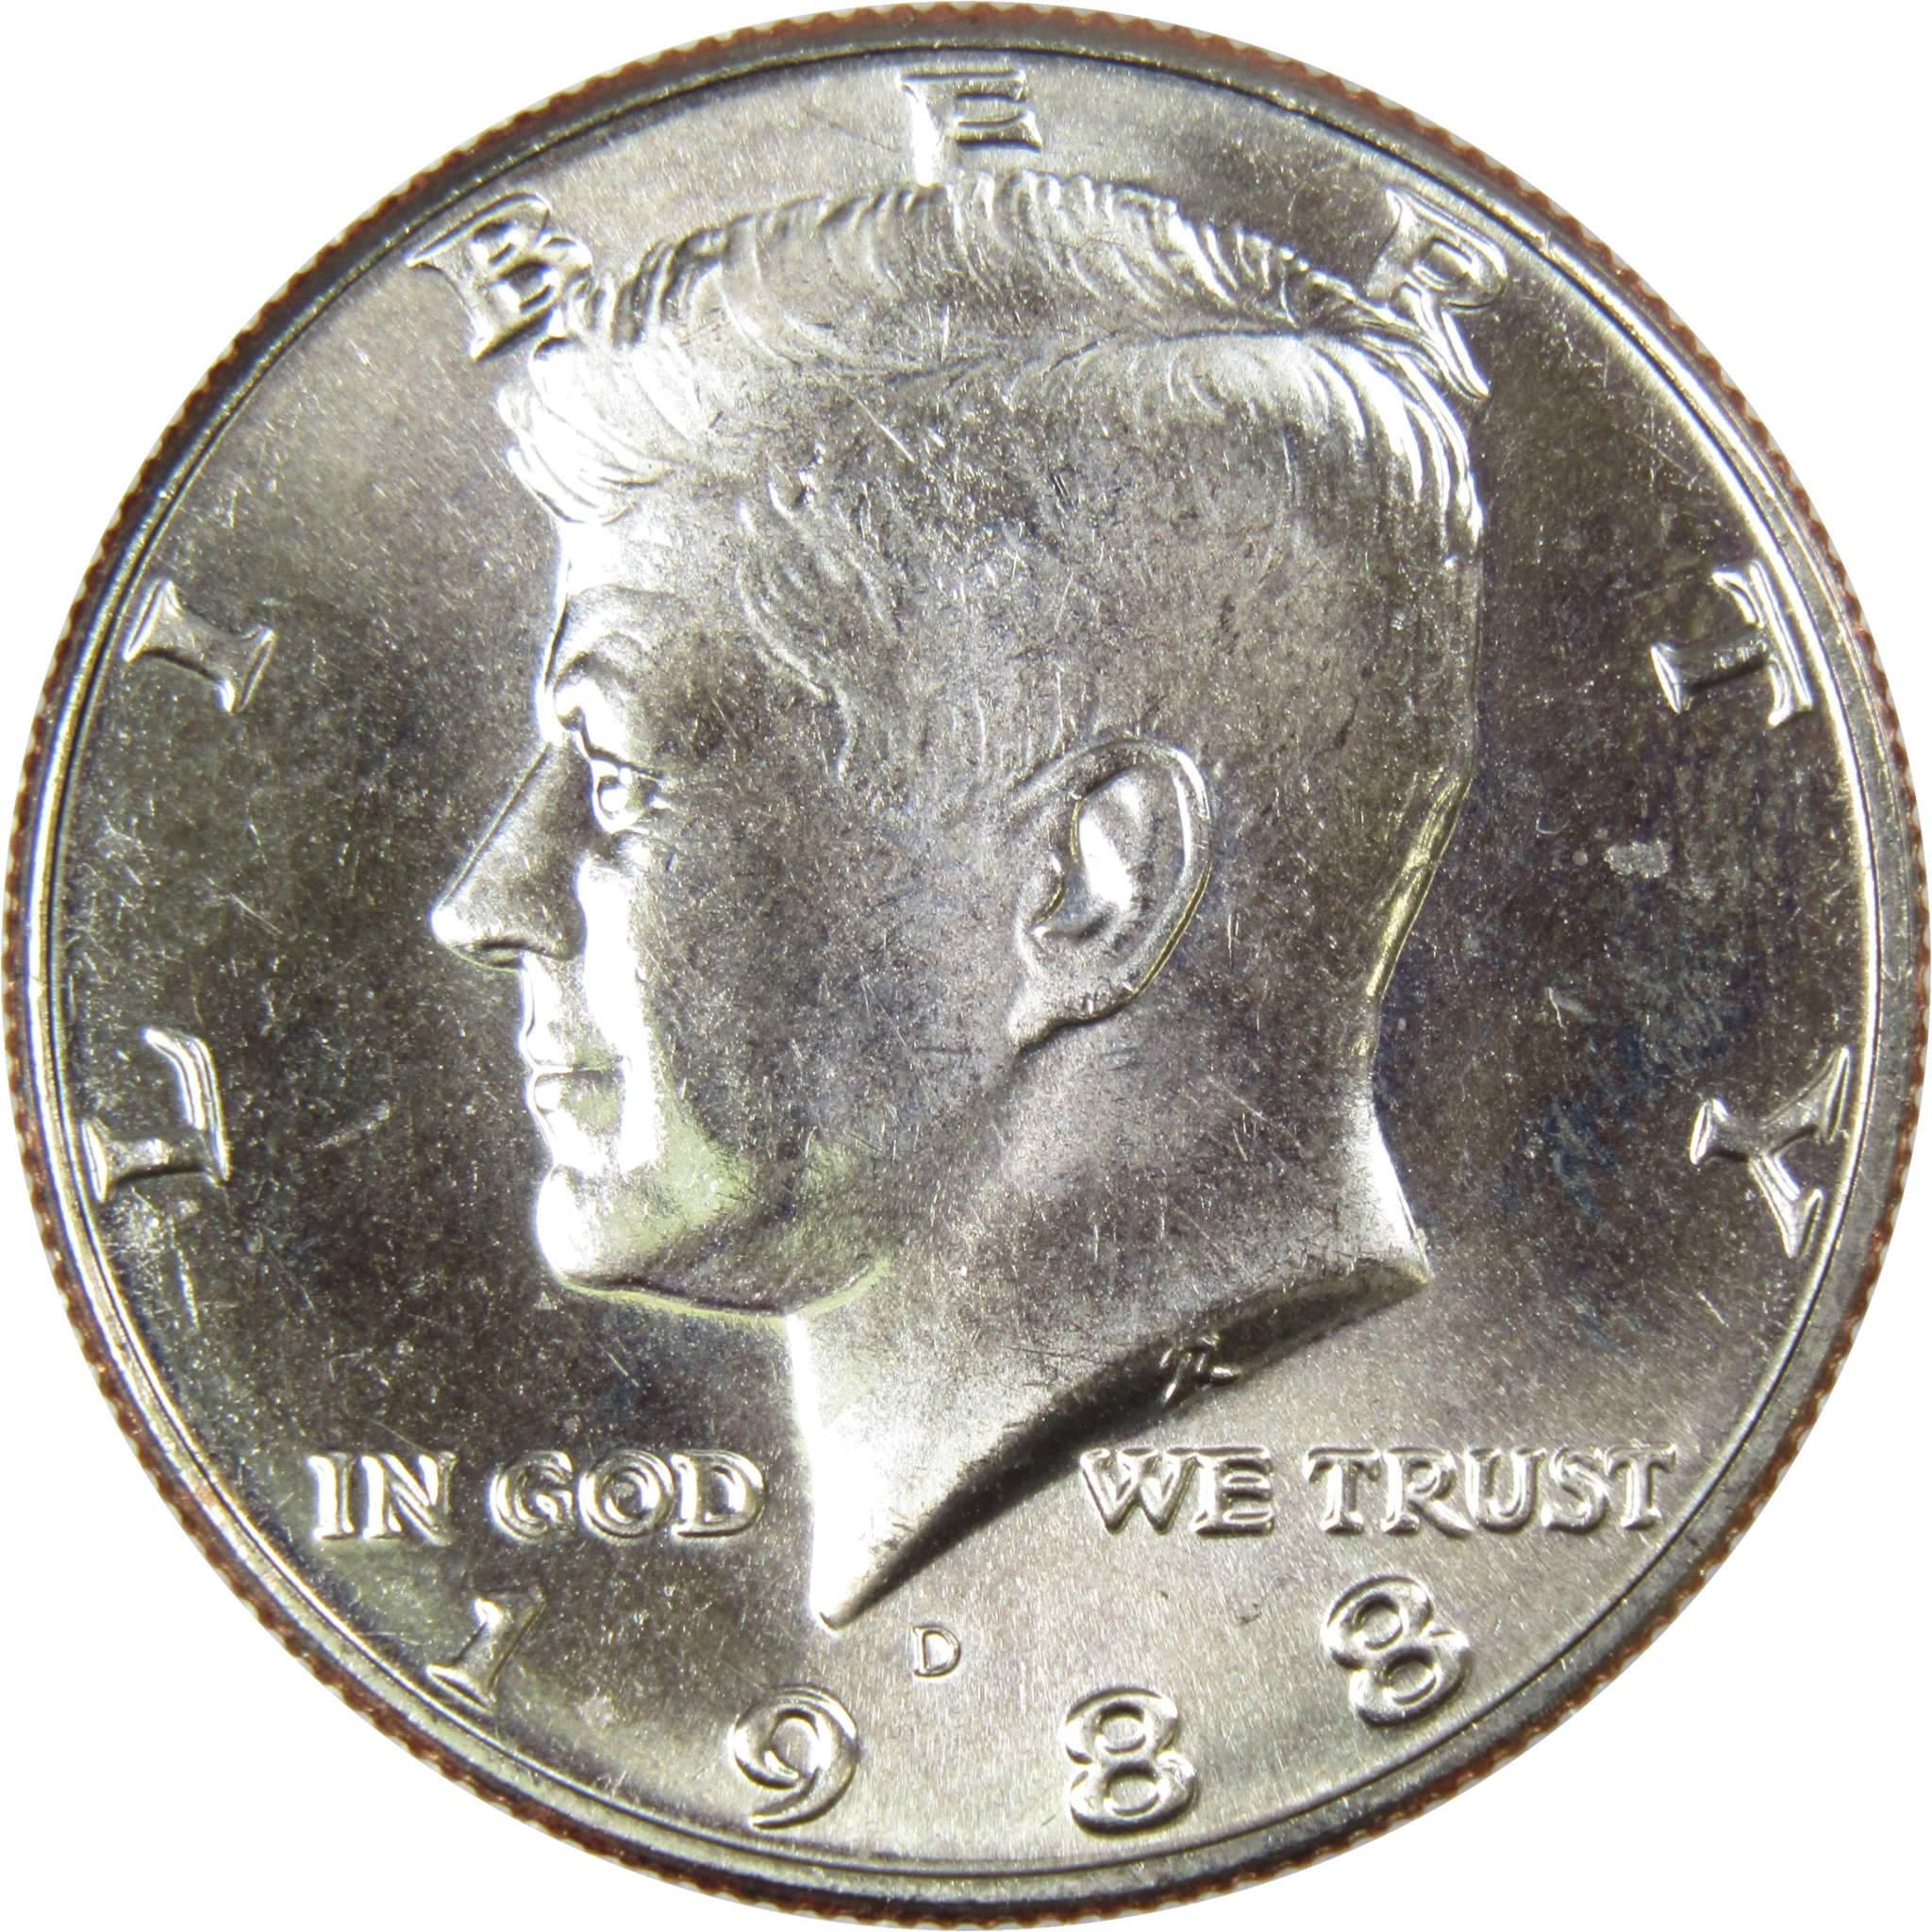 1988 D Kennedy Half Dollar BU Uncirculated Mint State 50c US Coin Collectible